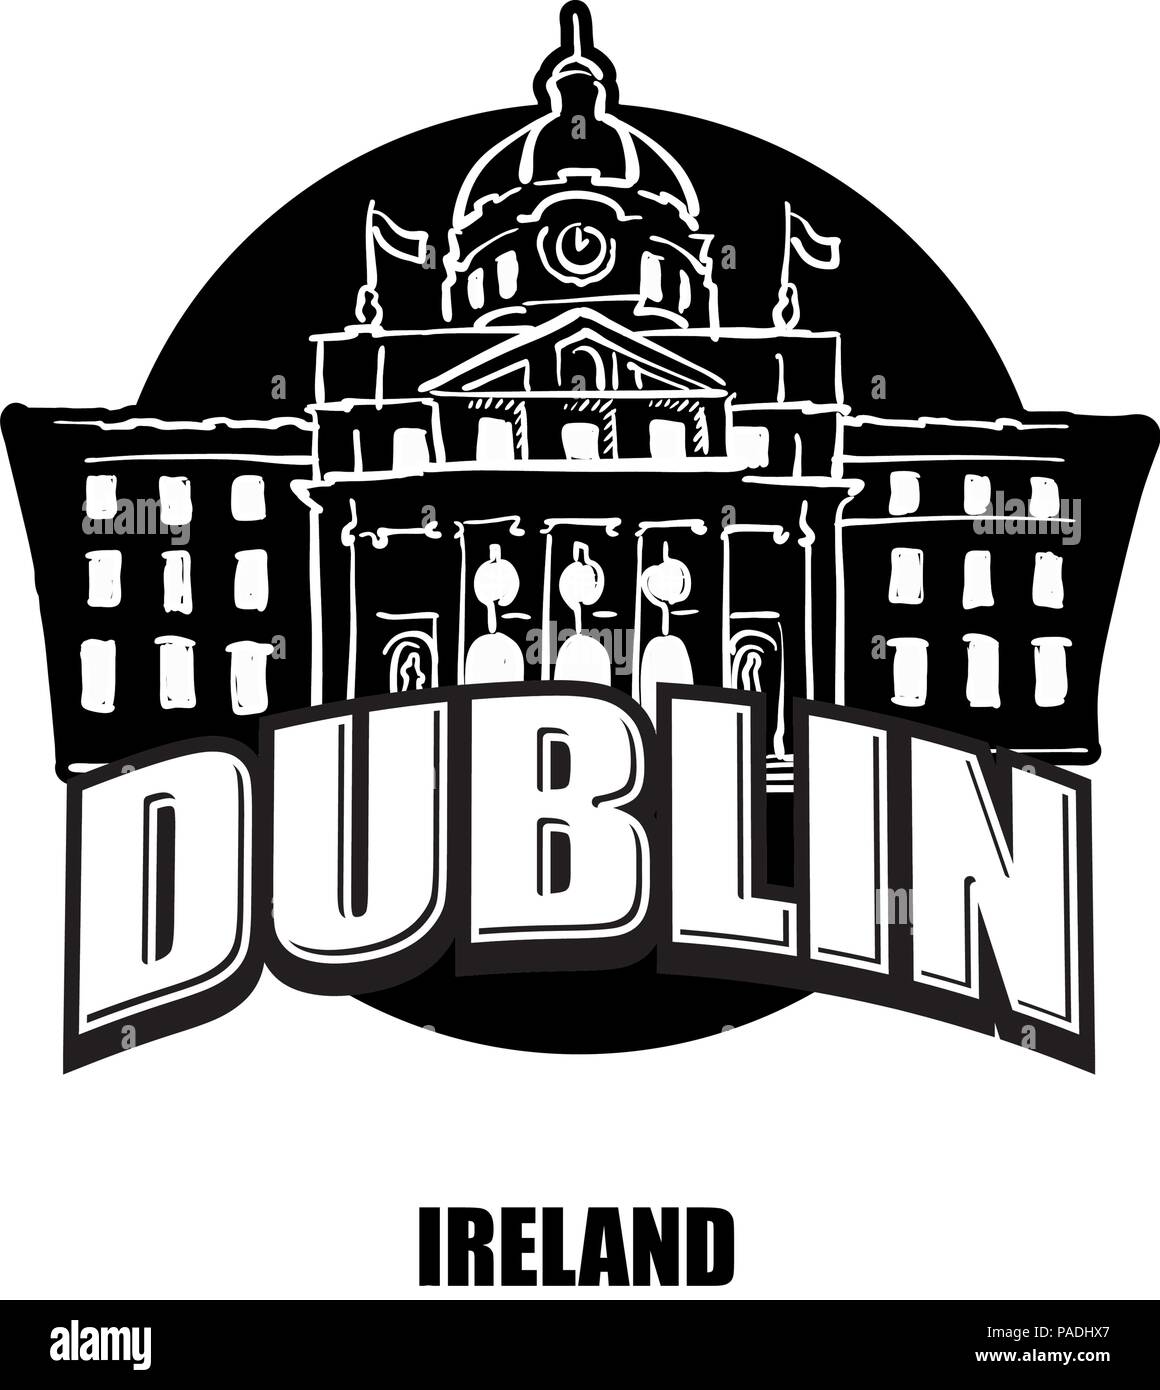 Dublin, Ireland, black and white logo for high quality prints. Hand drawn vector sketch. Stock Vector